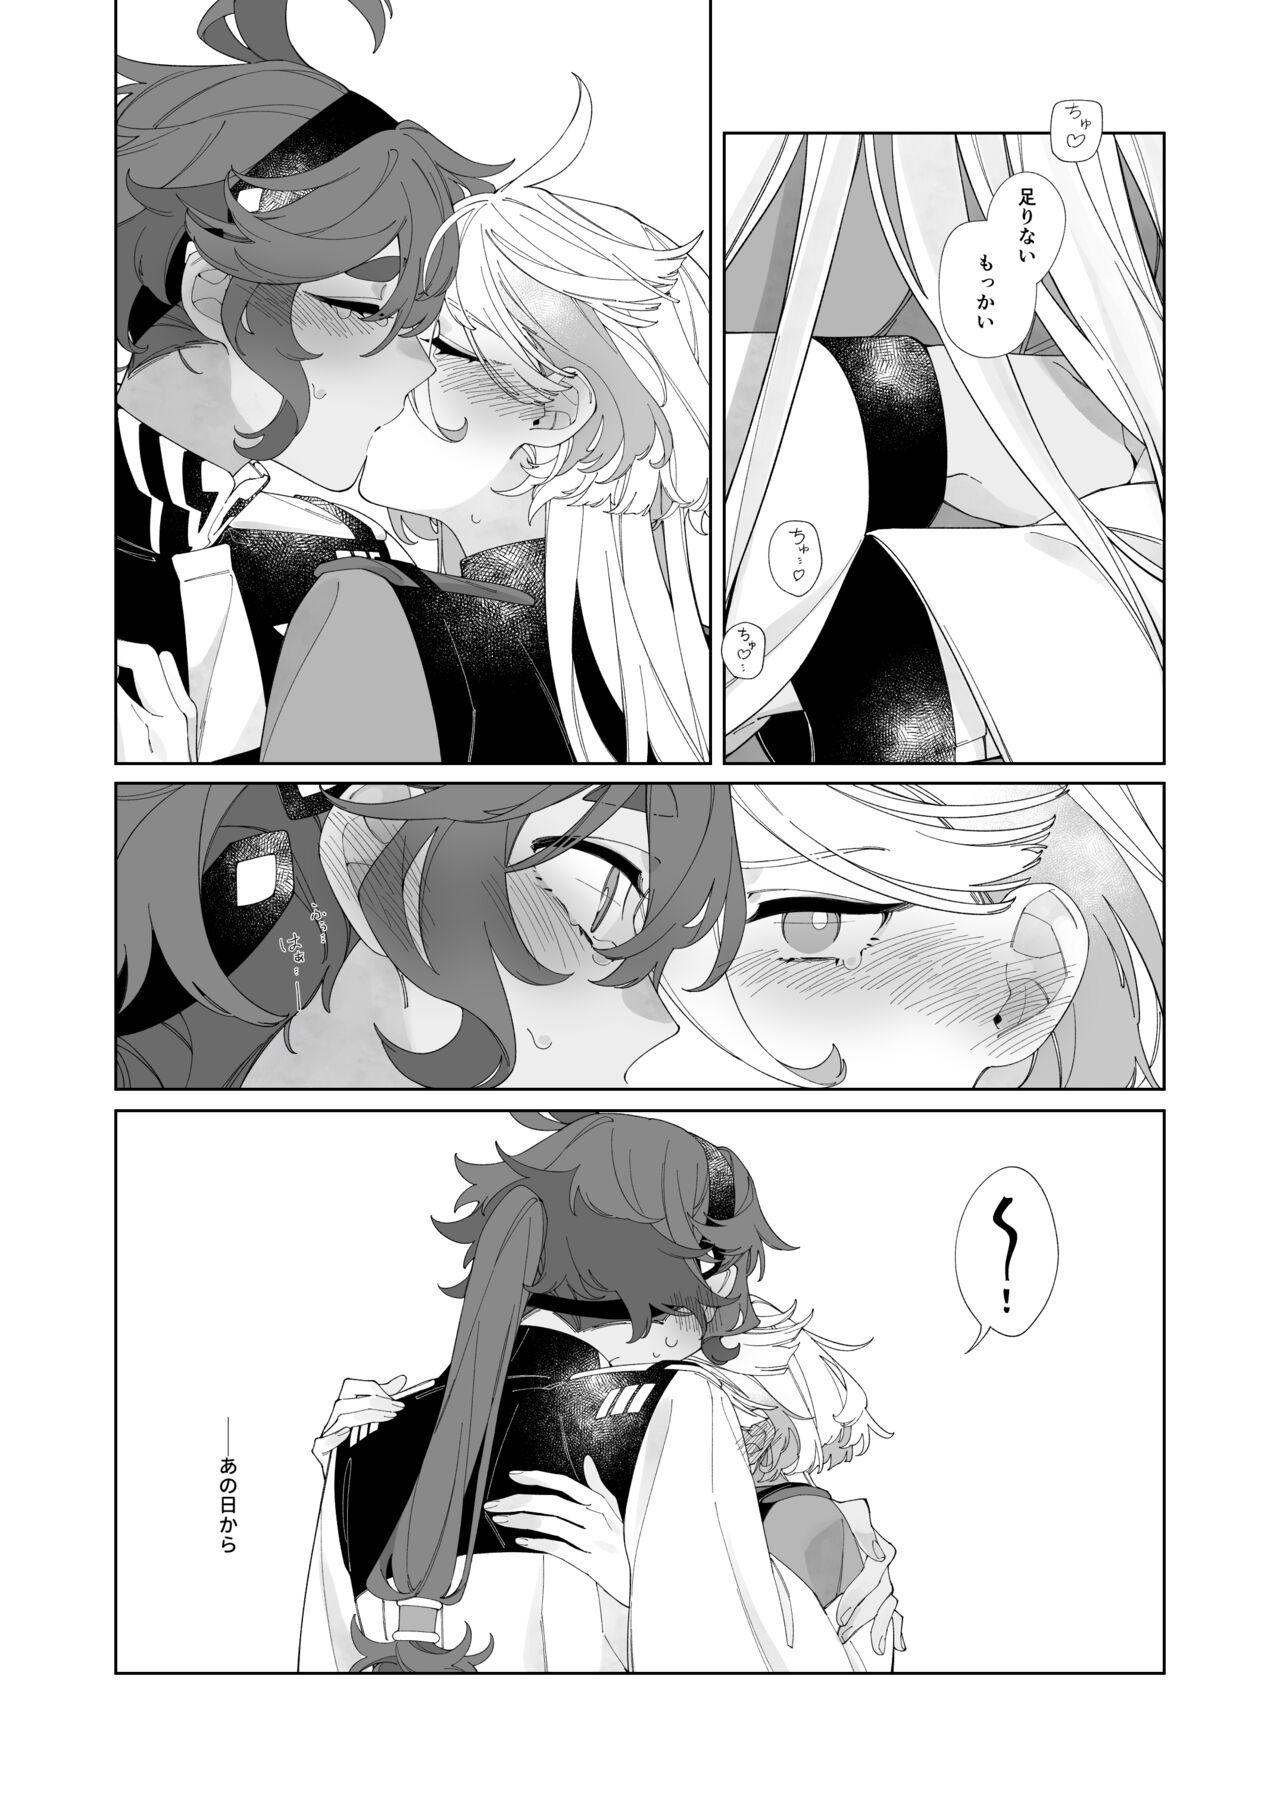 Banho Kiss no Ato Nani ga Shitai? - After kissing, what else do you want to do? - Mobile suit gundam the witch from mercury Thong - Page 8